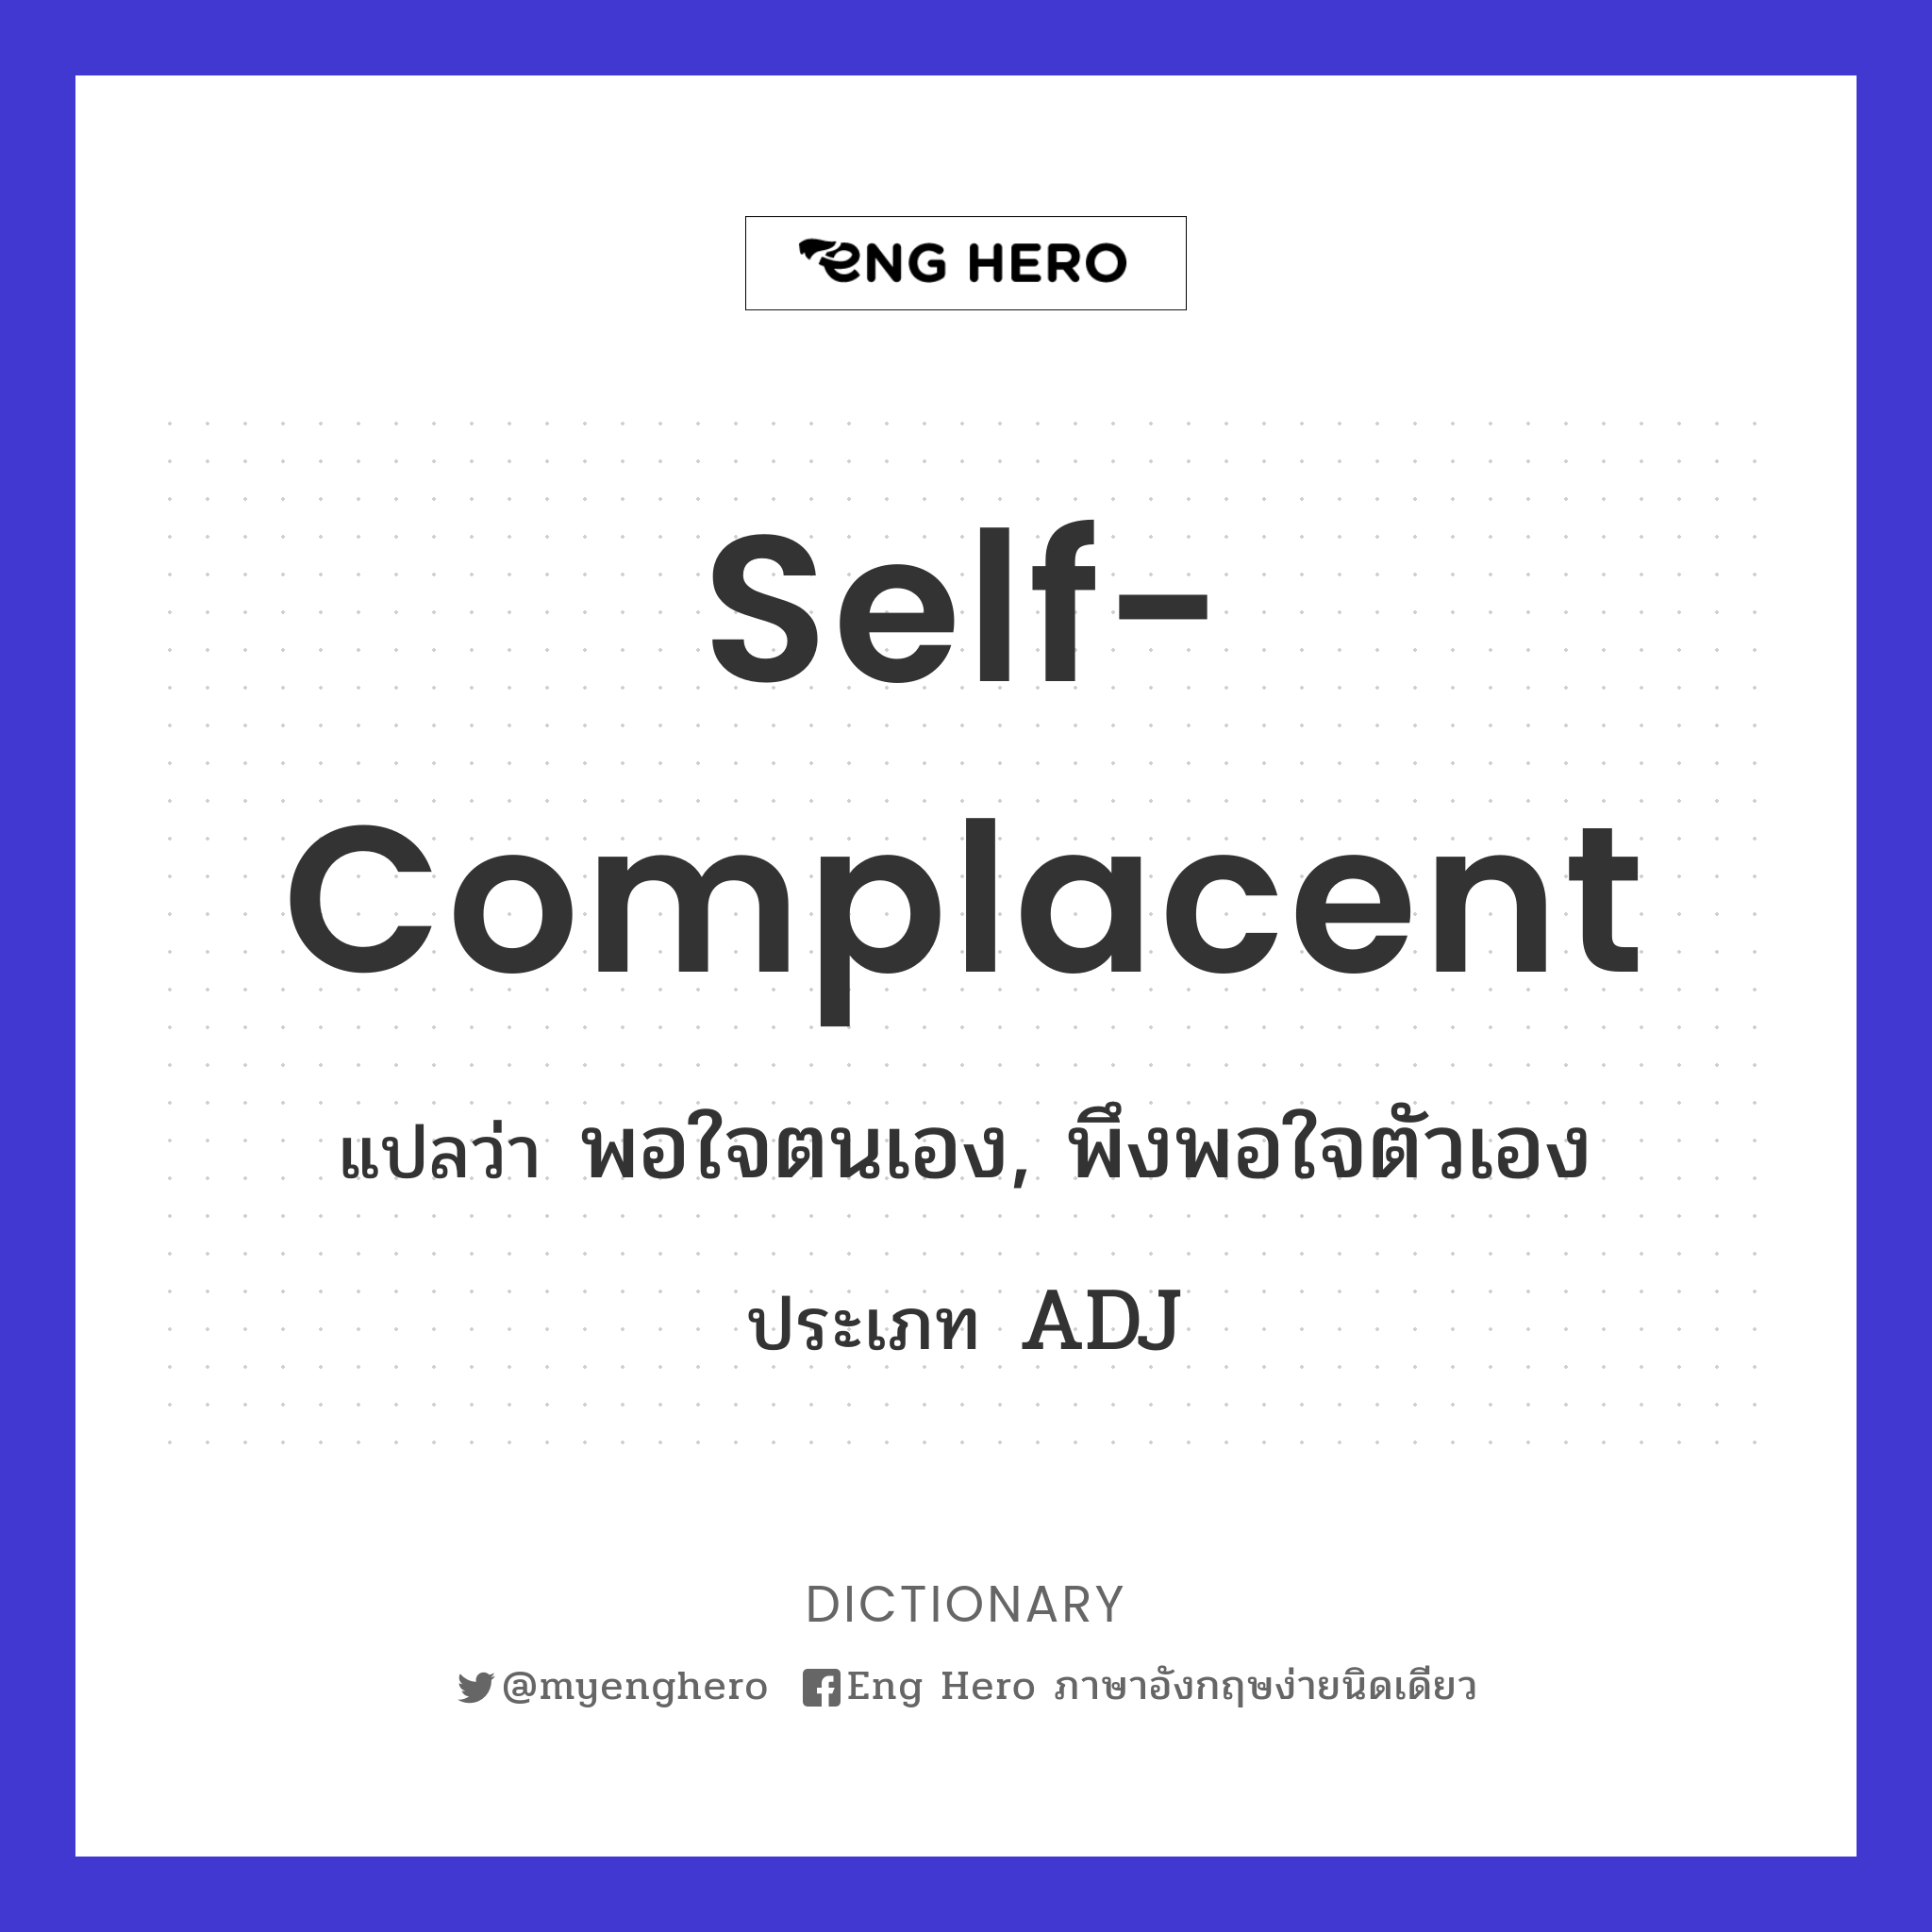 self-complacent